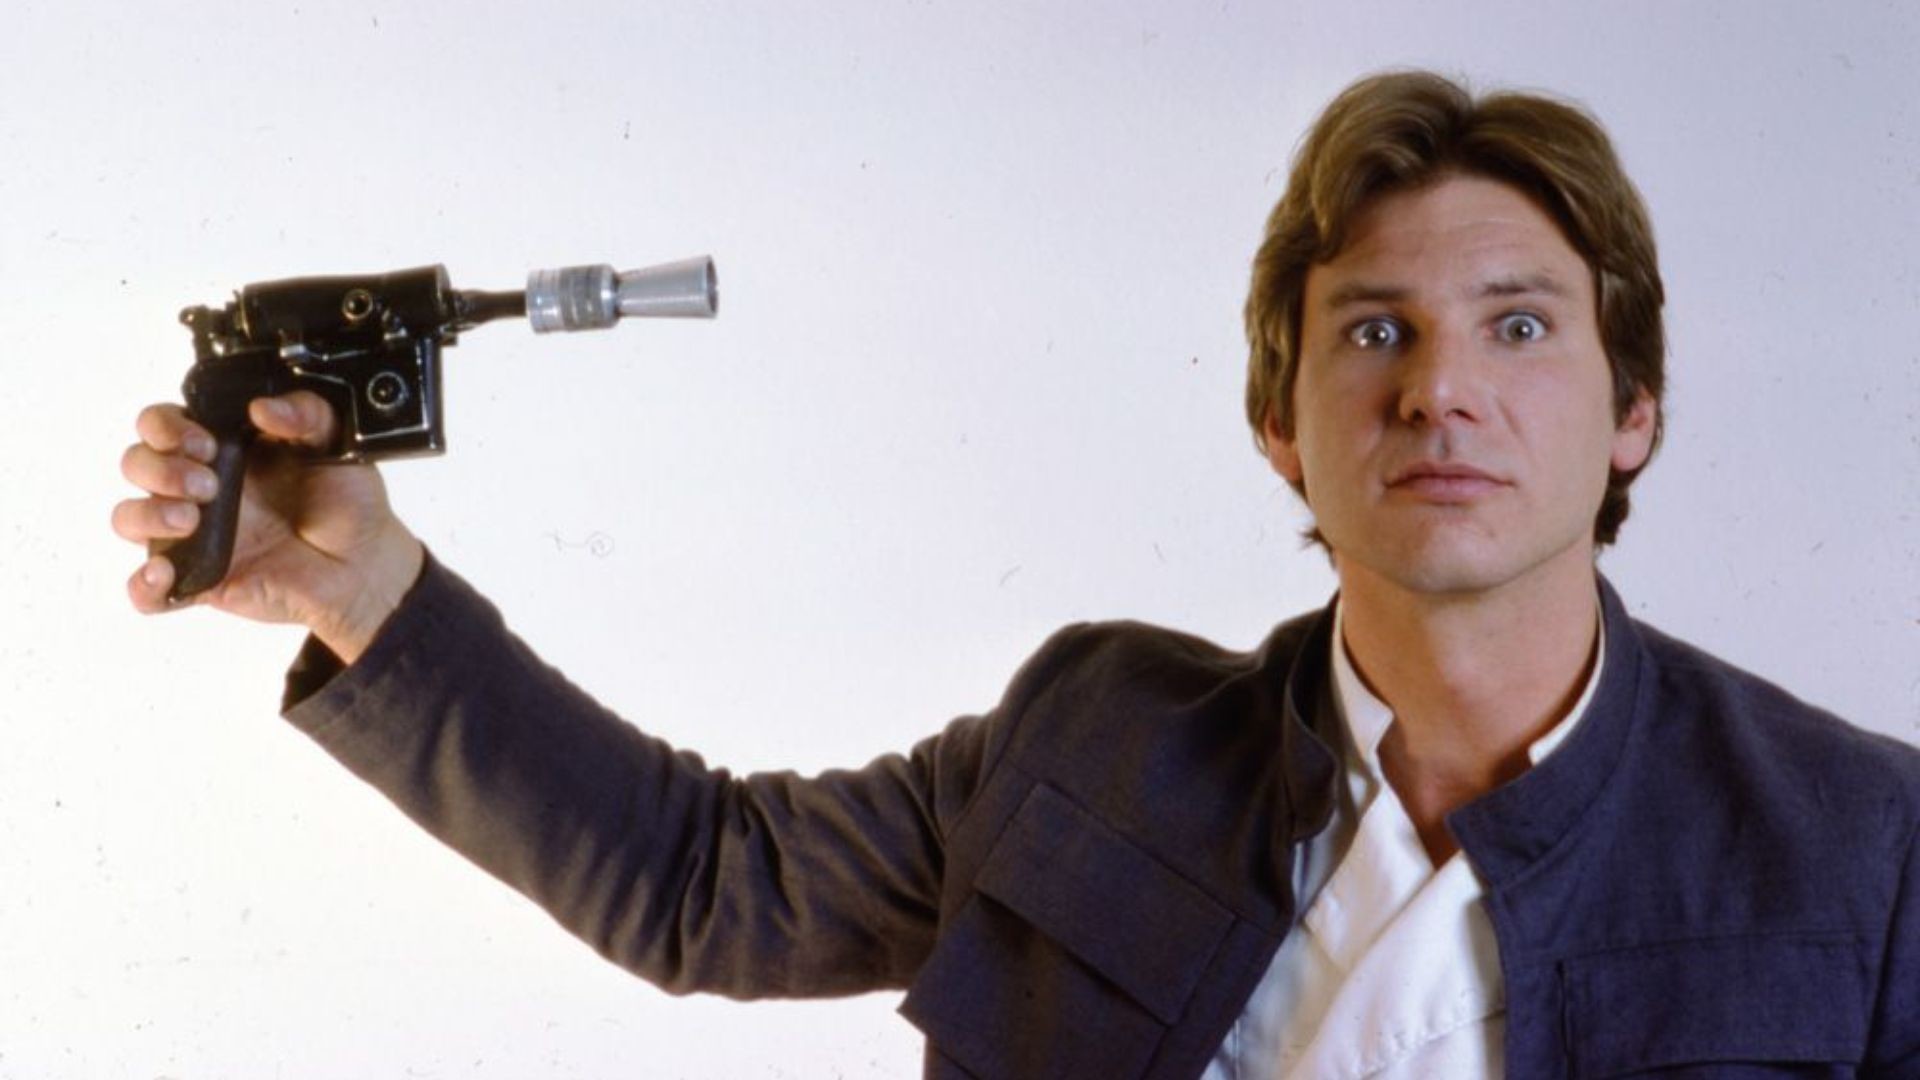 1920x1080 Han Solo gets his own Star Wars movie: New character spin-off sees Han go  Solo